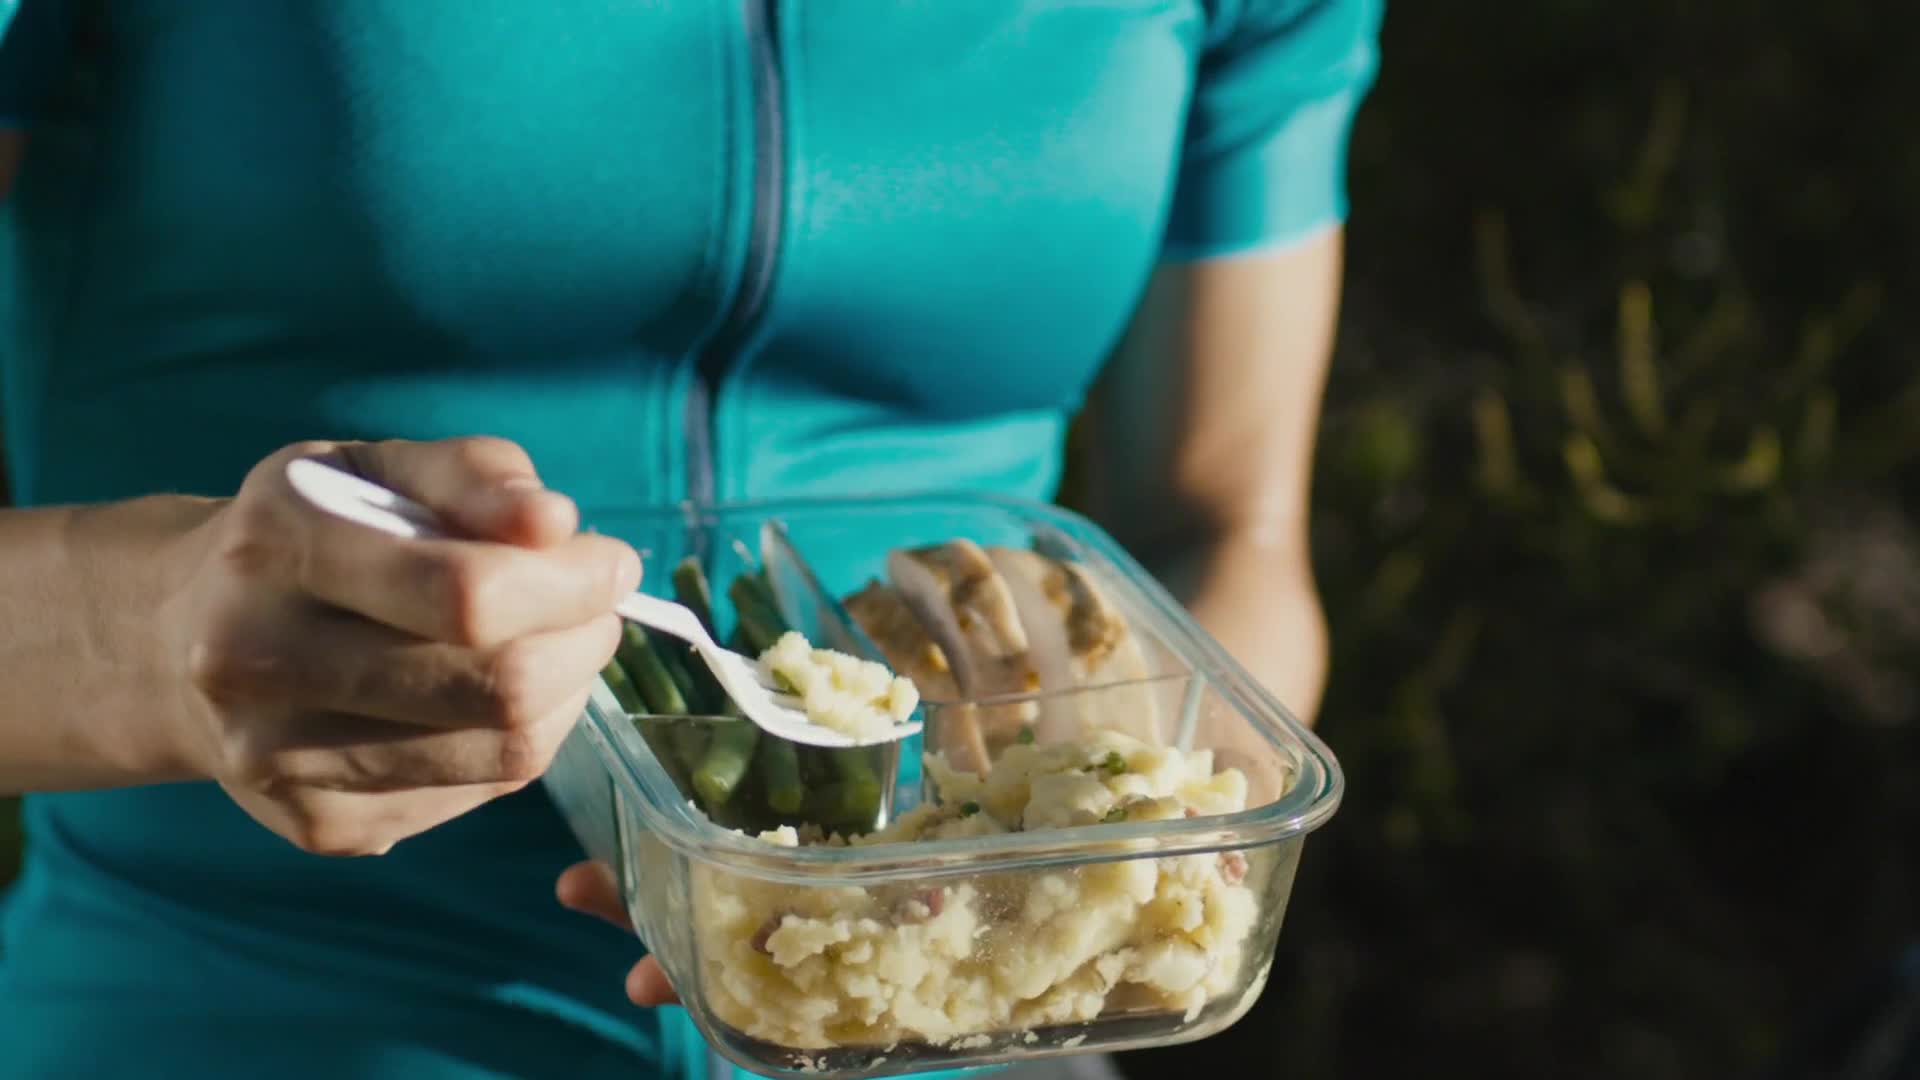 Potatoes USA《What Are You Eating-Cycling》